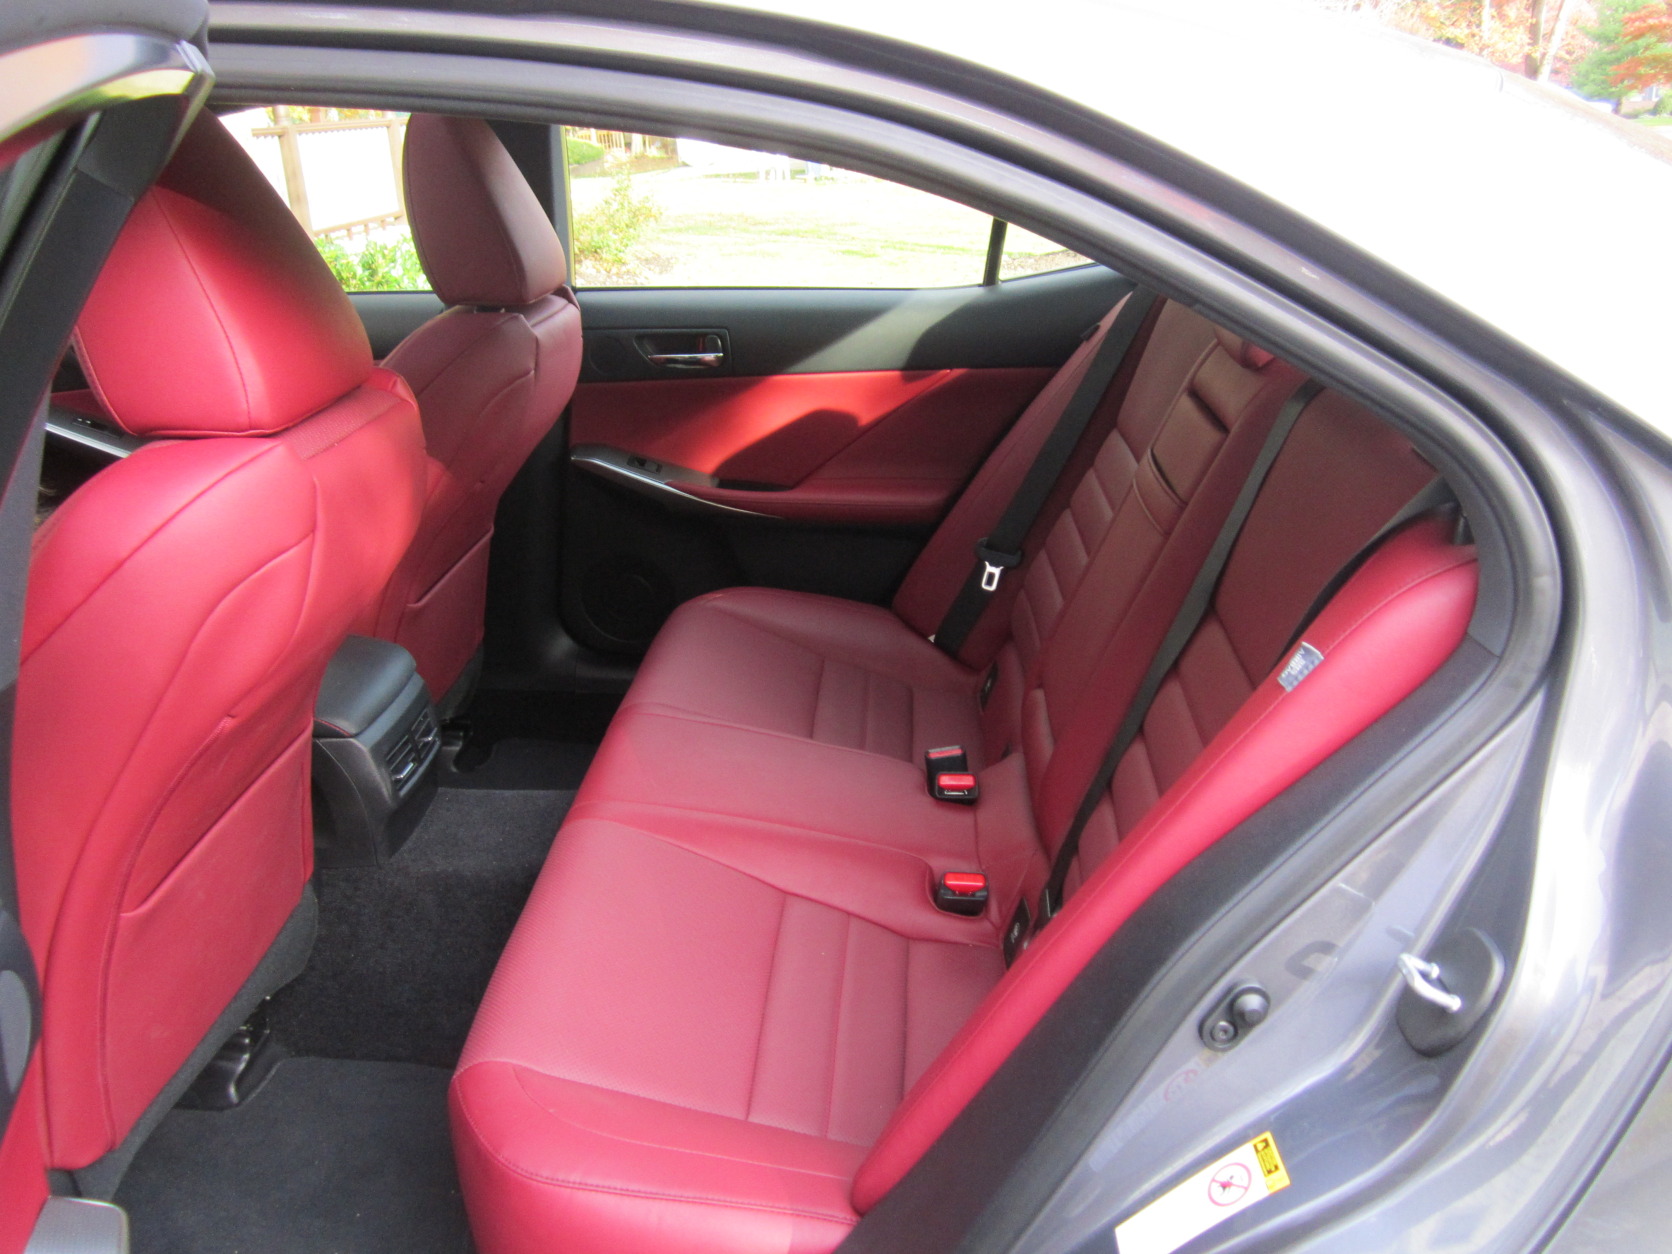 The rear seats are a little roomier than before, but still a bit tight for tall people. (WTOP/Mike Parris)